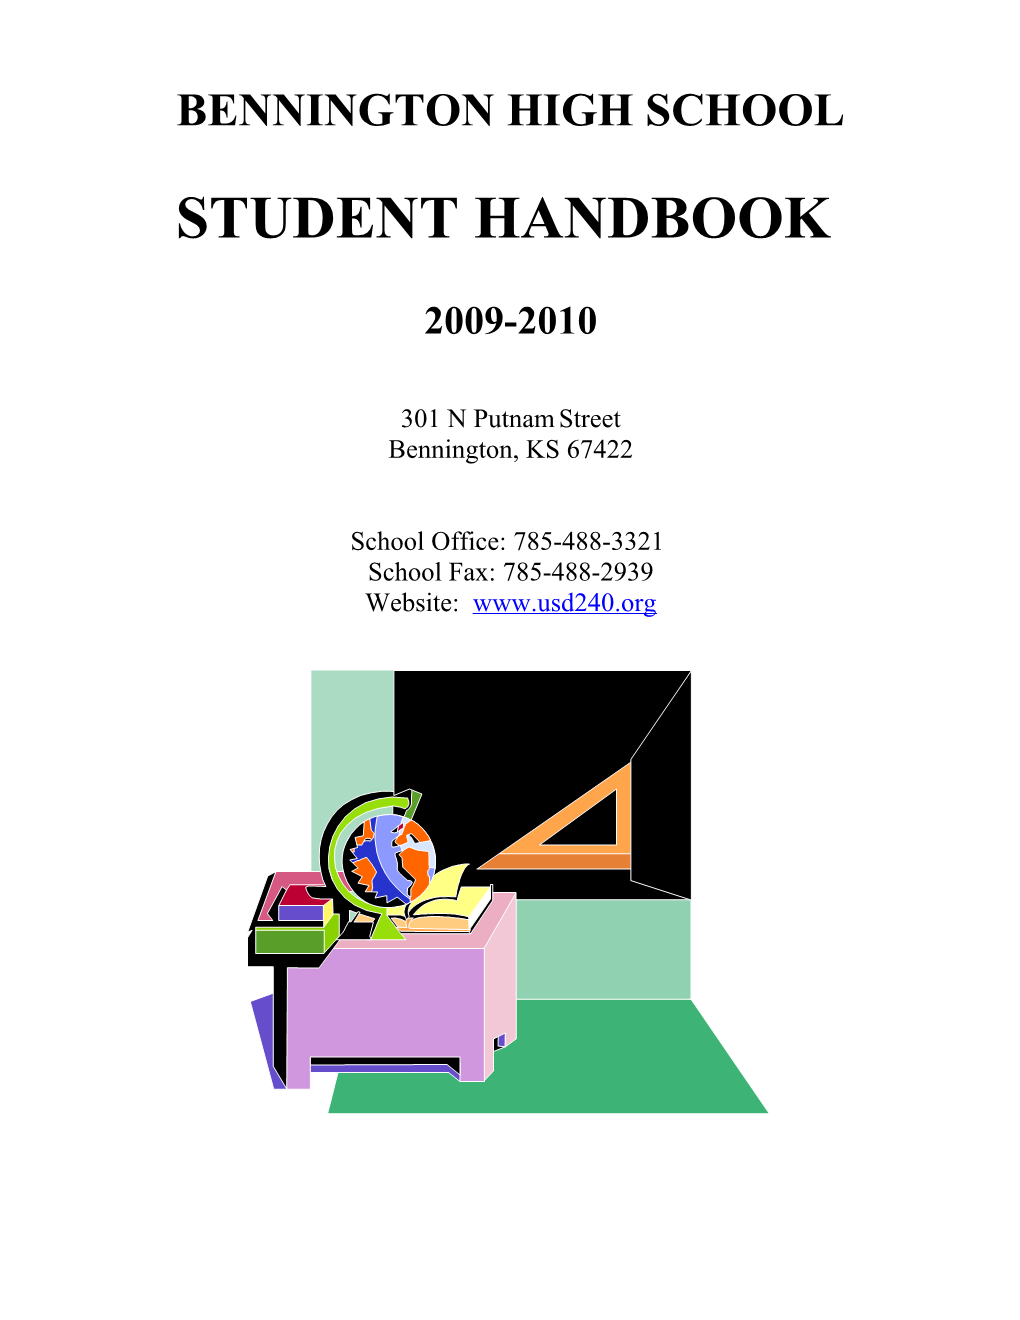 Recommended Outline for Student Handbook 2003-04